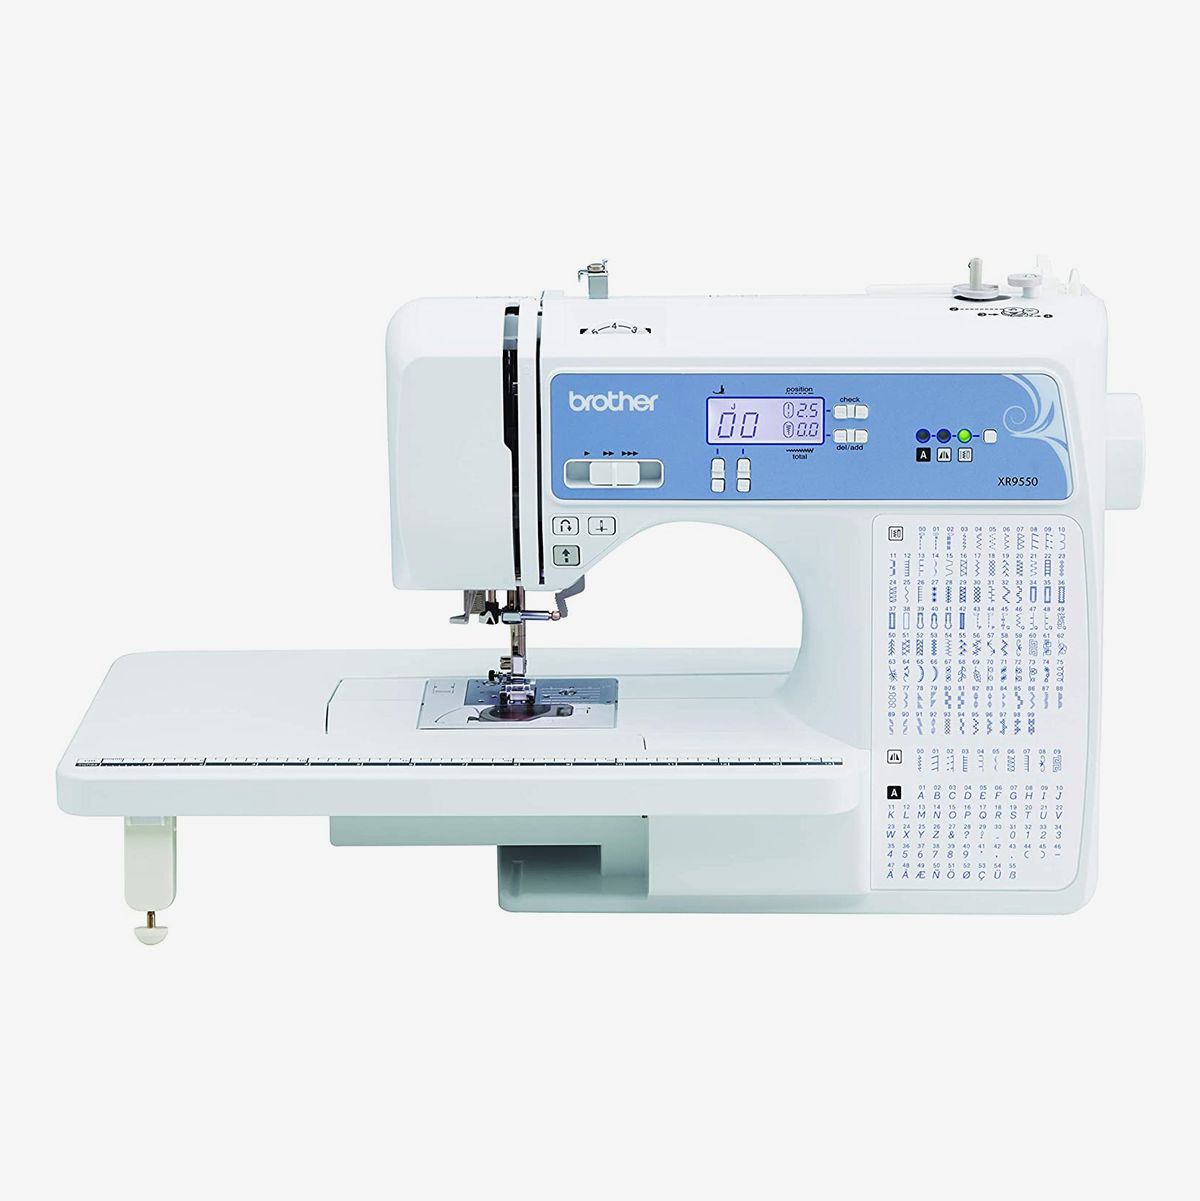 Pictures Of A Sewing Machine